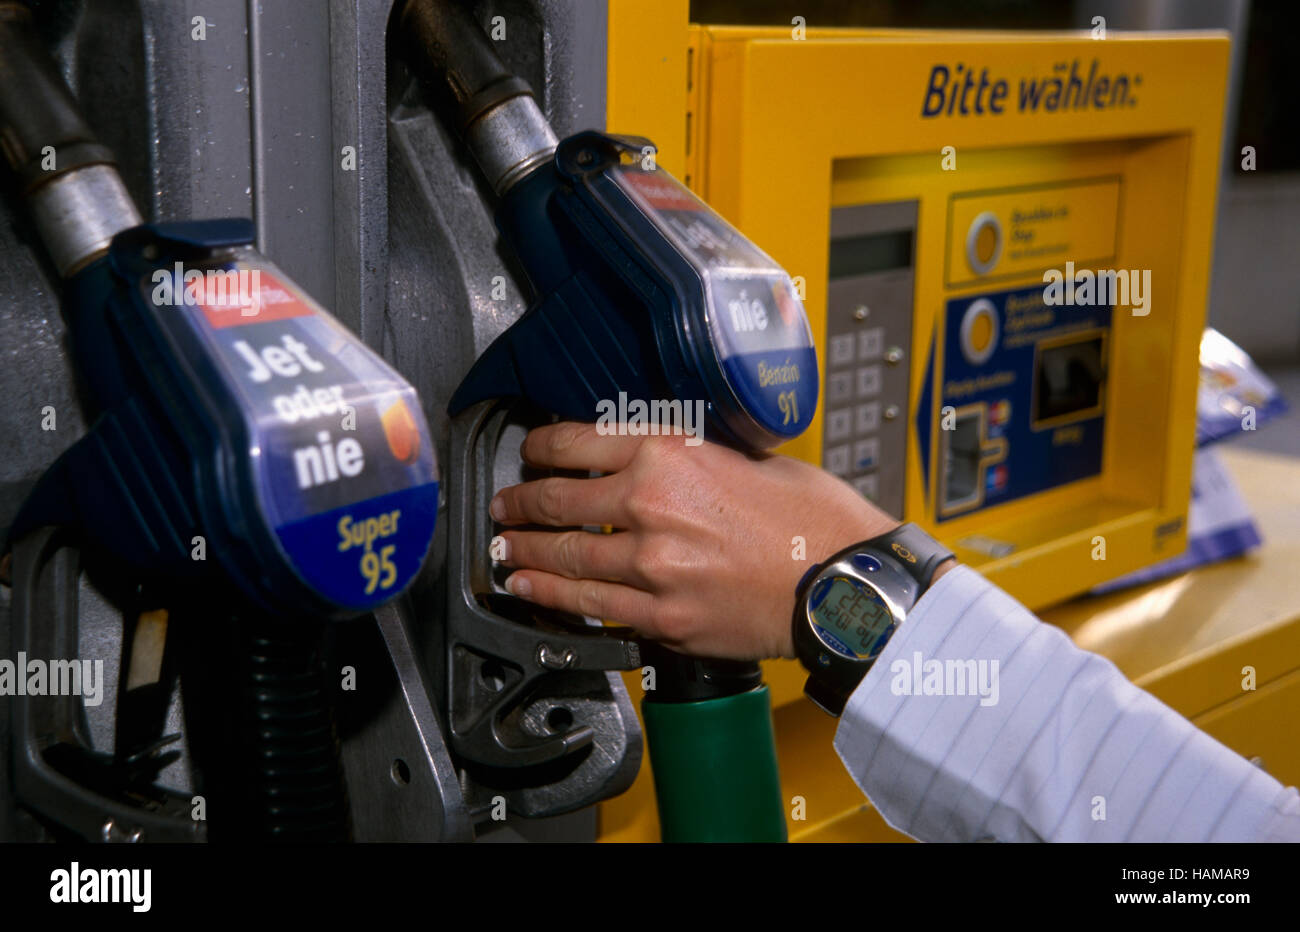 Hand removing the nozzle of the petrol pump ready to fill the car's tank, Steyr, Upper Austria, Europe Stock Photo